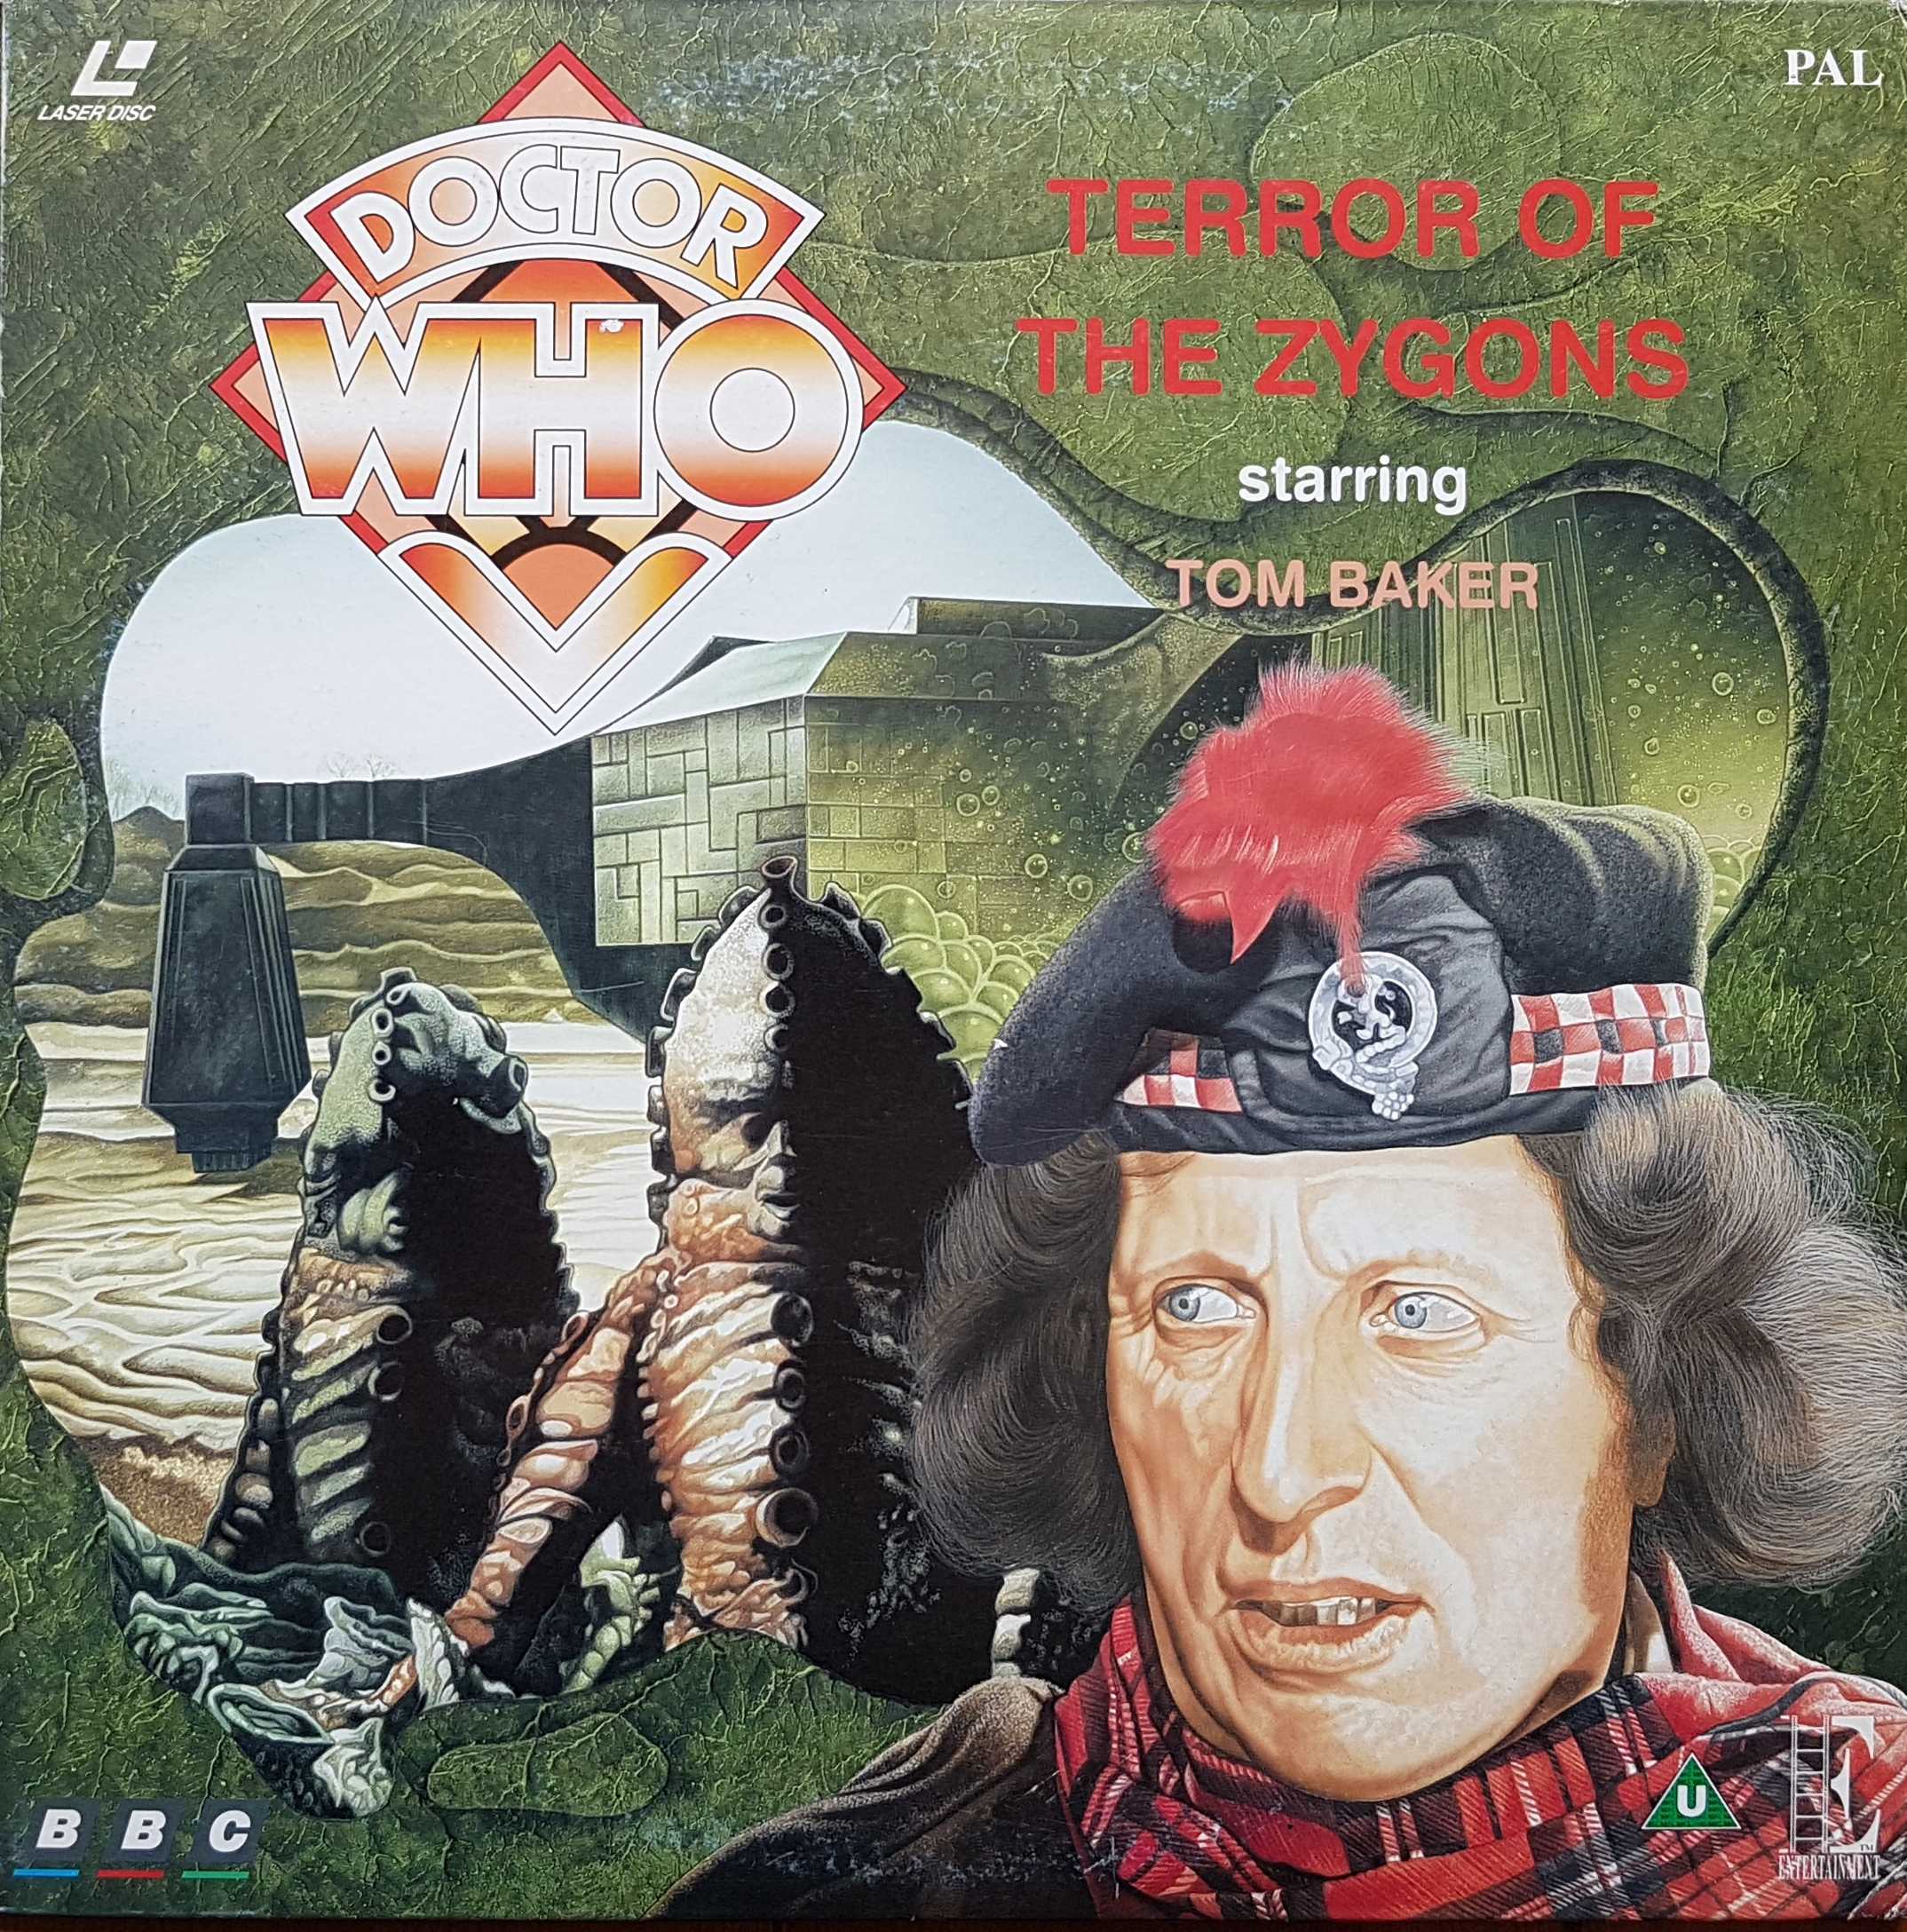 Picture of EE 1203 Doctor Who - Terror of the Zygons by artist Robert Banks Stewart from the BBC anything_else - Records and Tapes library